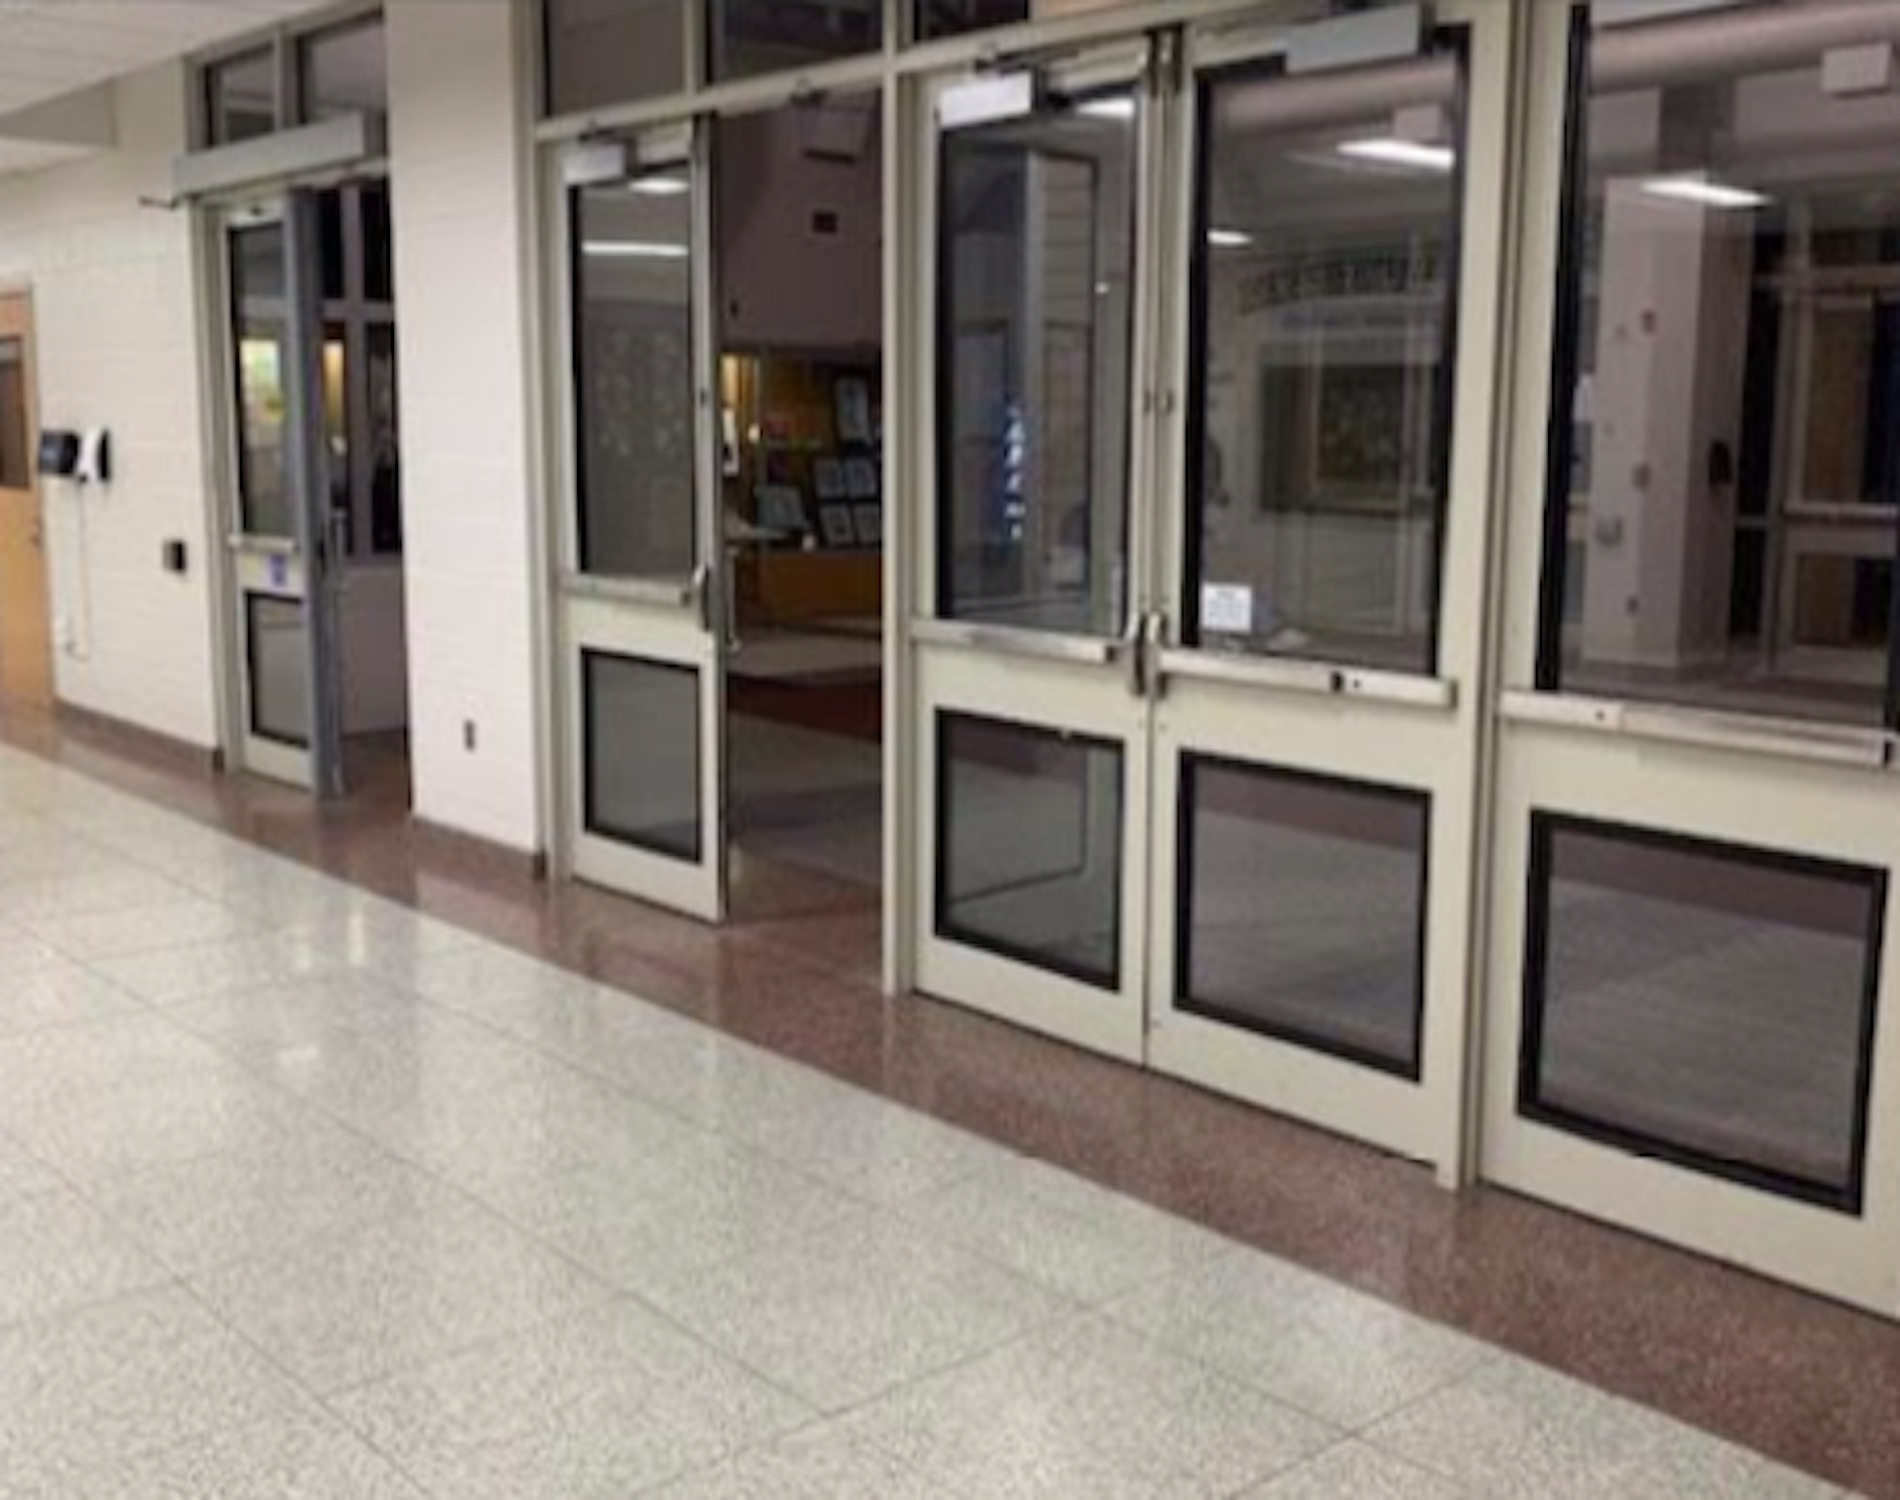 Lobby doors districtwide, especially those seen are at East Hampton High School, need to be replaced for safety and technology reasons. EAST HAMPTON SCHOOL DISTRICT